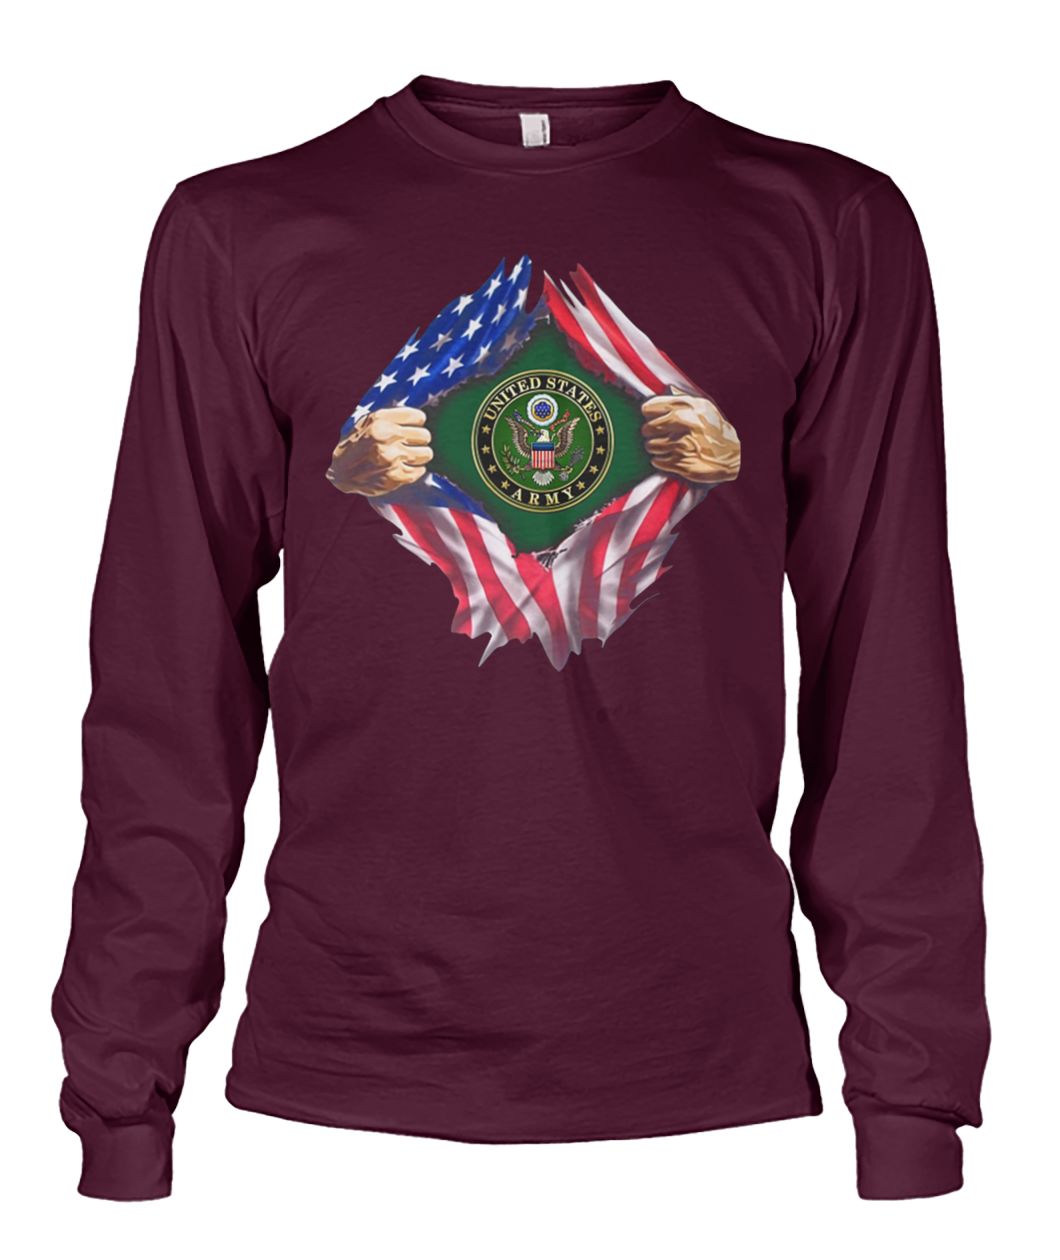 4th of july united states army inside american flag unisex long sleeve